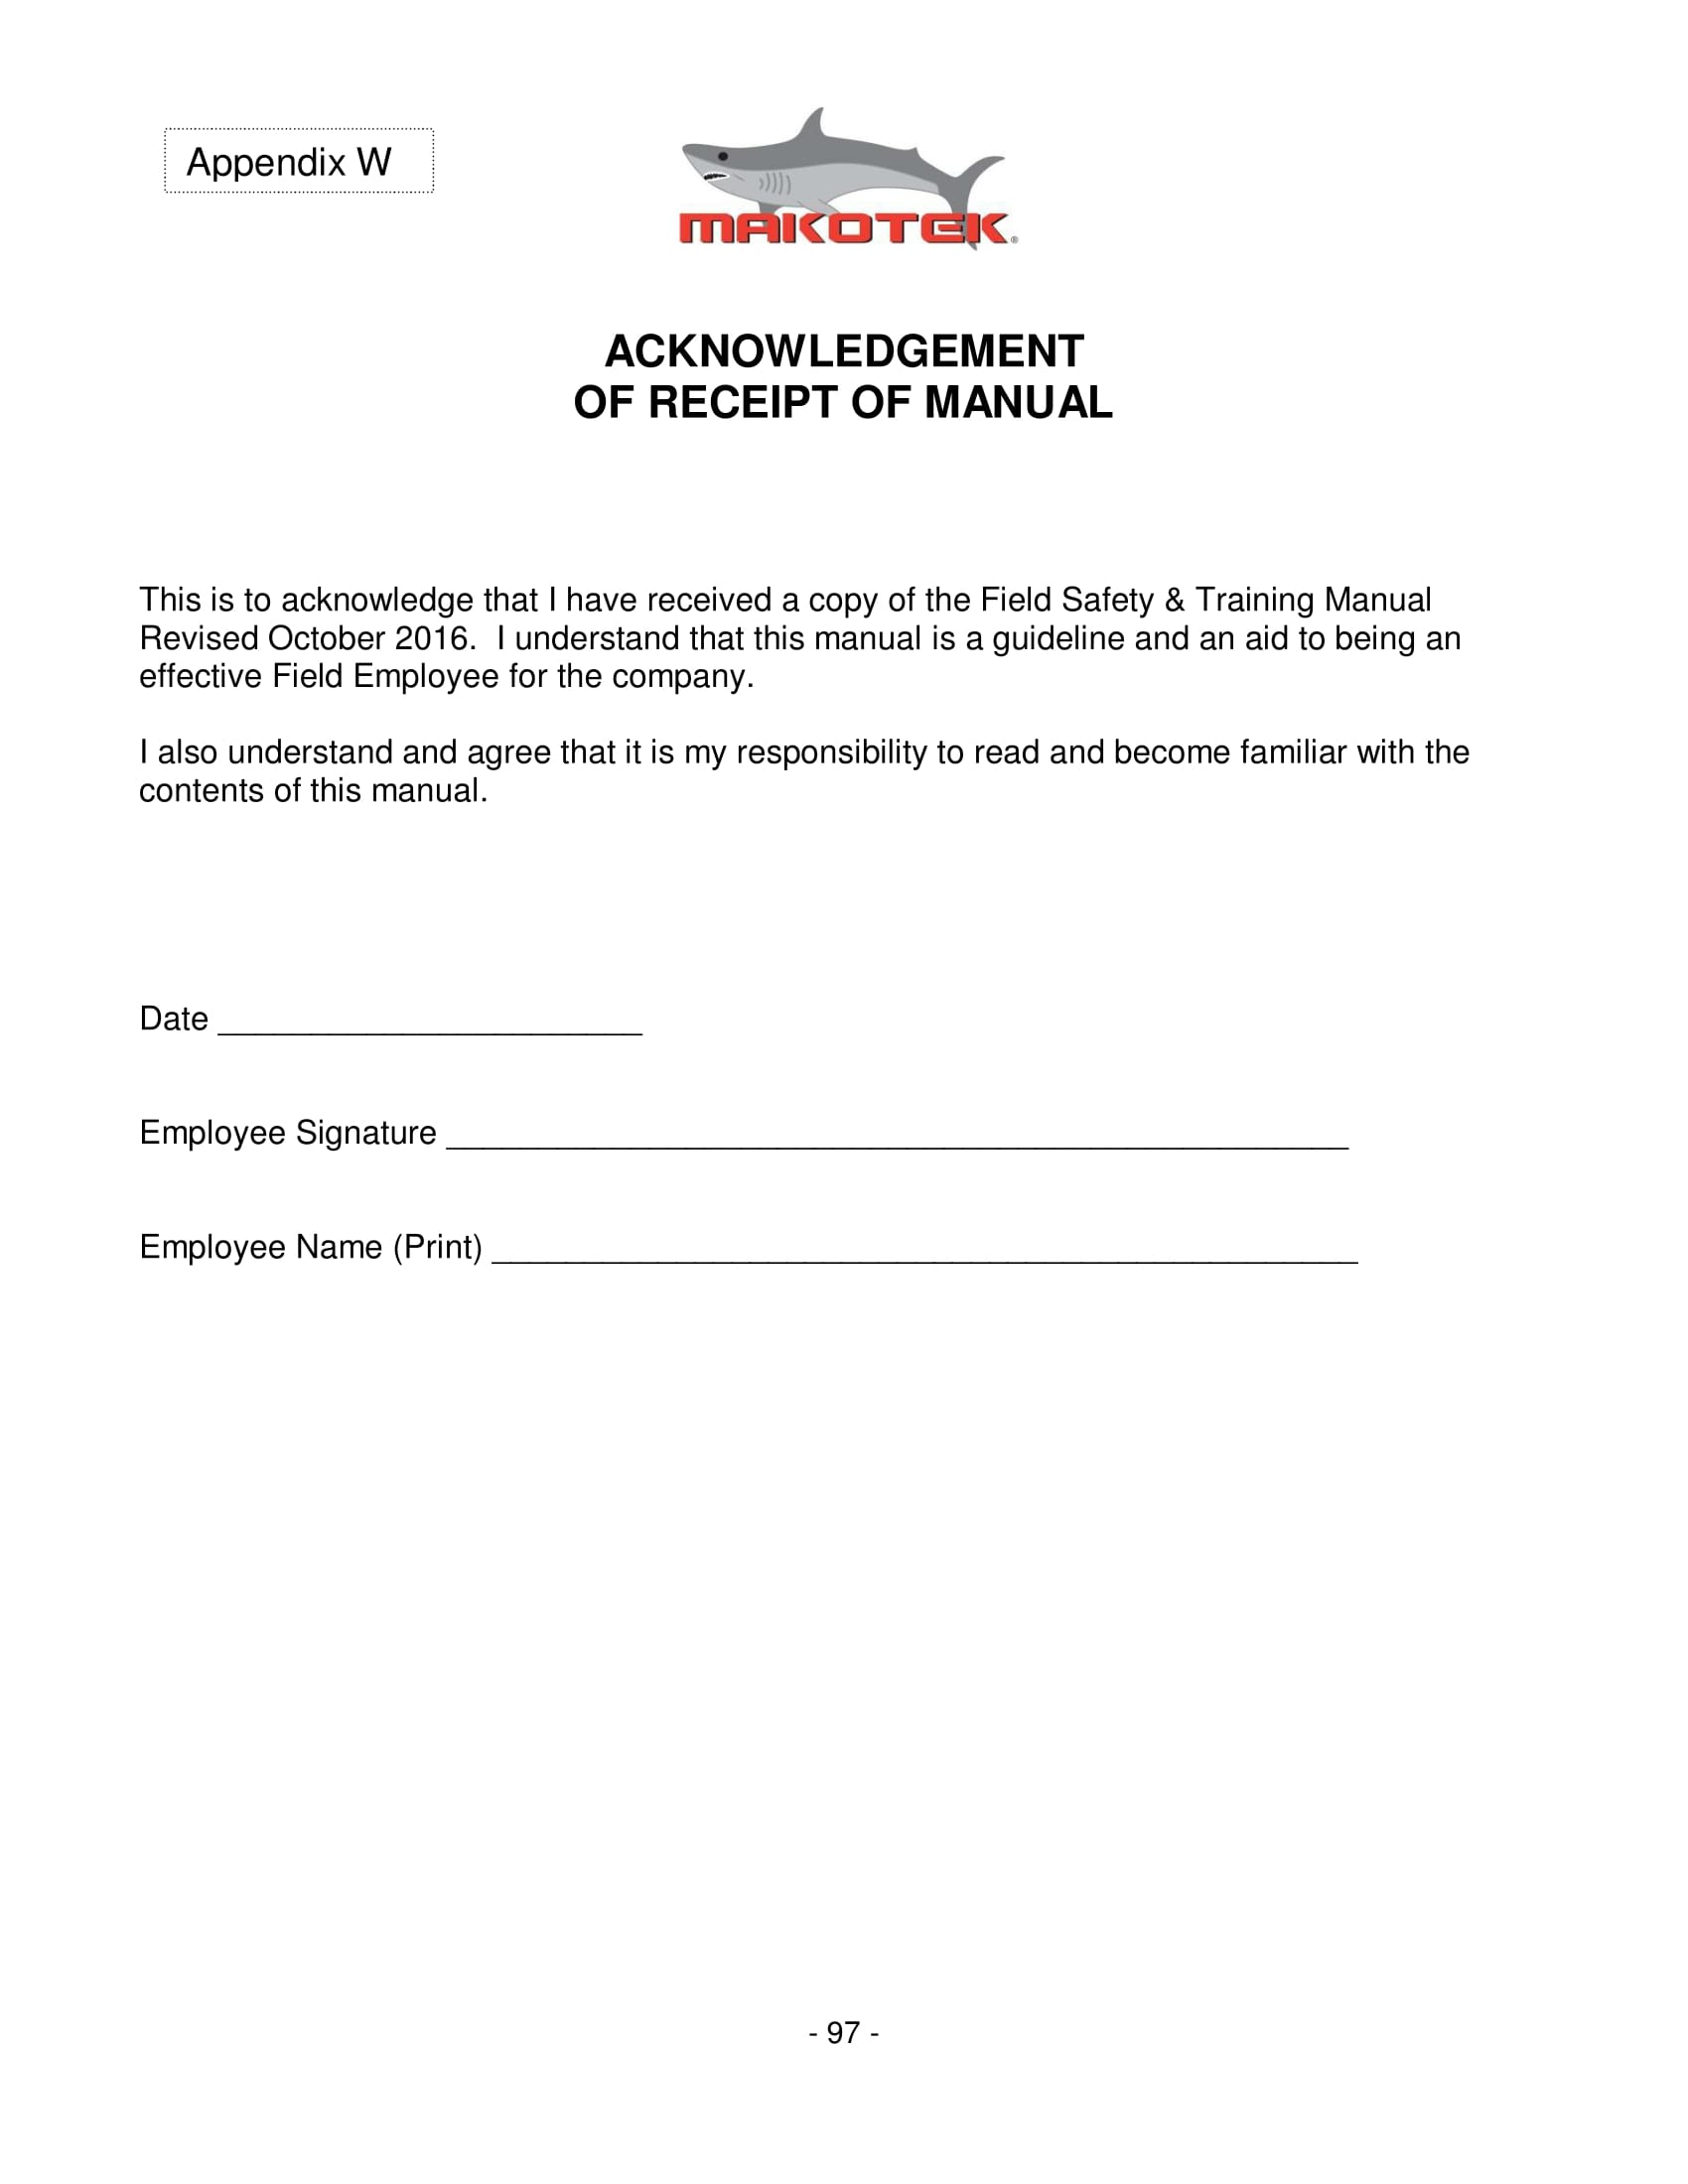 Samples Of Acknowledgement Receipt Rent Receipt Template For Dummies 